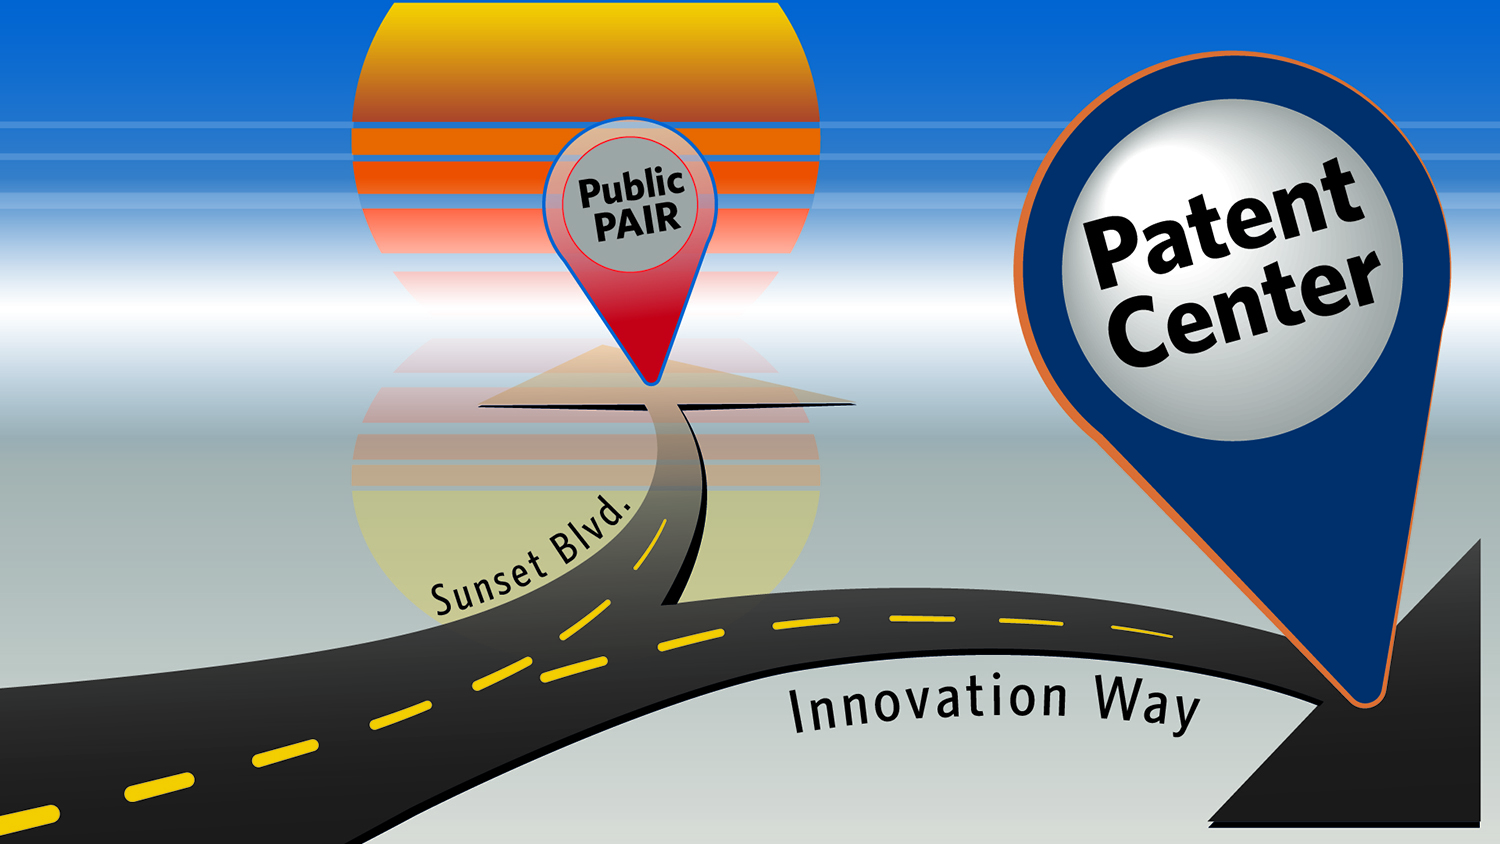 A road diverges with two GPS markers showing two paths: Sunset Blvd taking Public PAIR towards a sunset while Innovation Way directs towards the Patent Center.